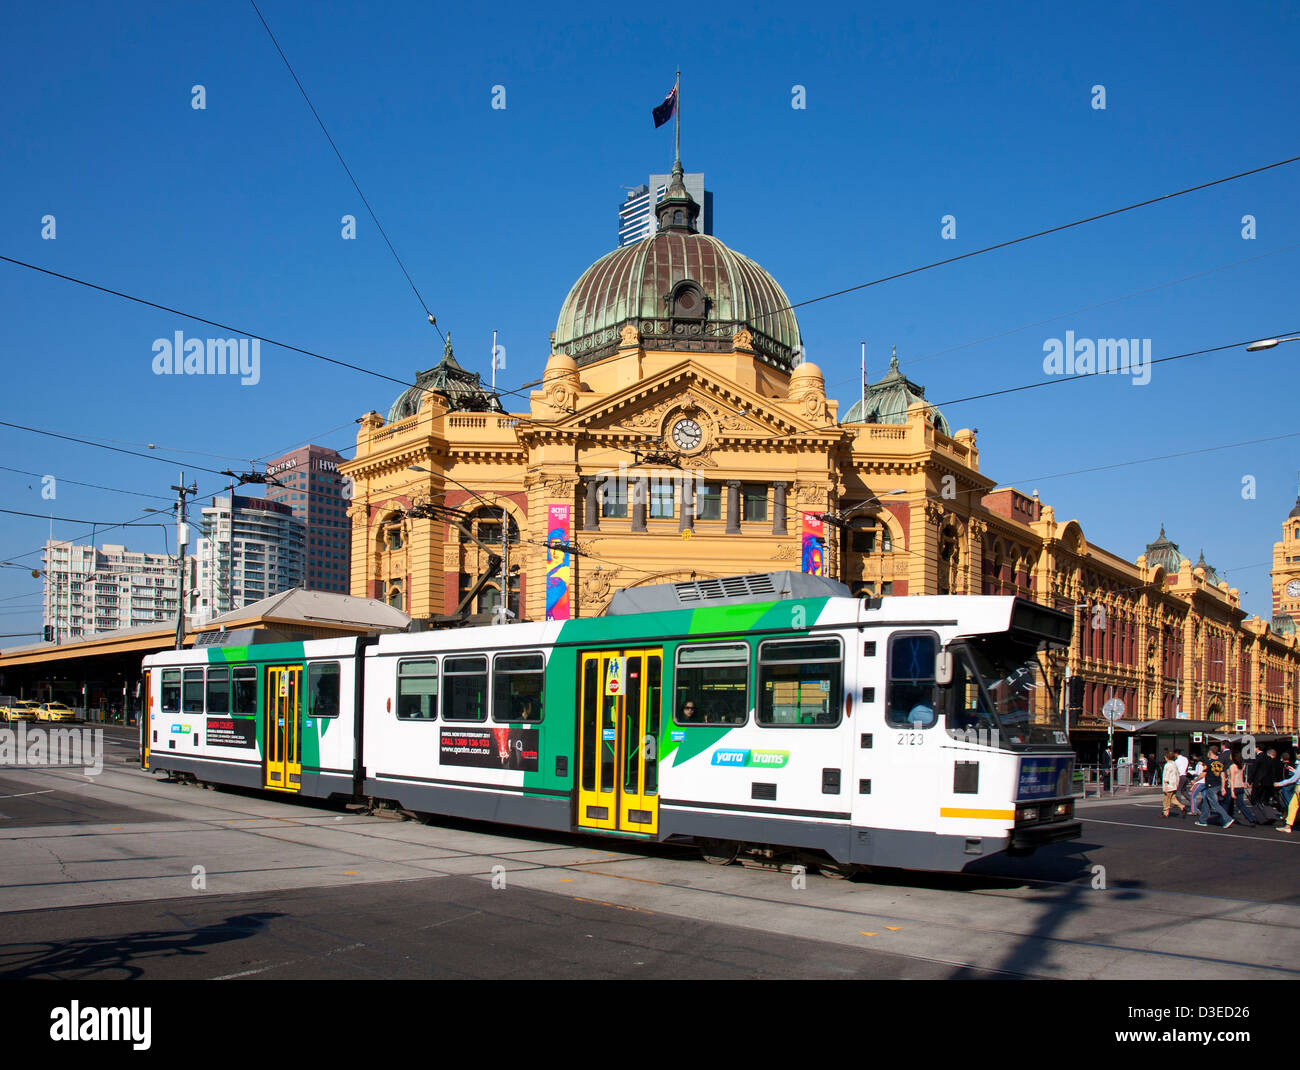 Flinders Street Station Tram High Resolution Stock Photography and Images -  Alamy